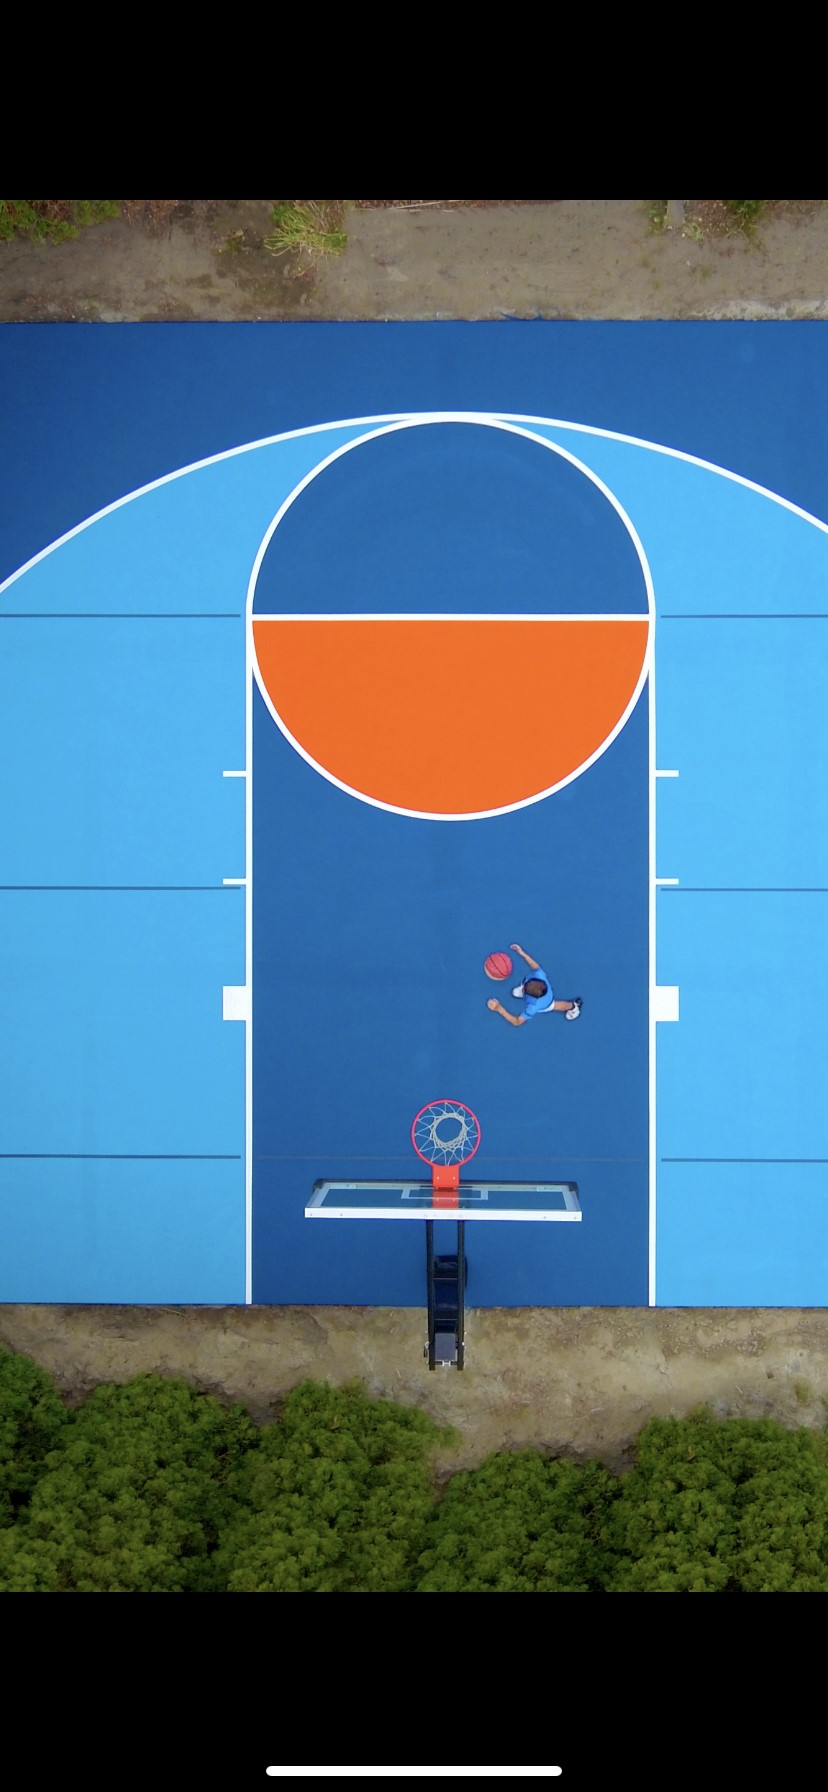 A basketball court with a hoop and a ball.